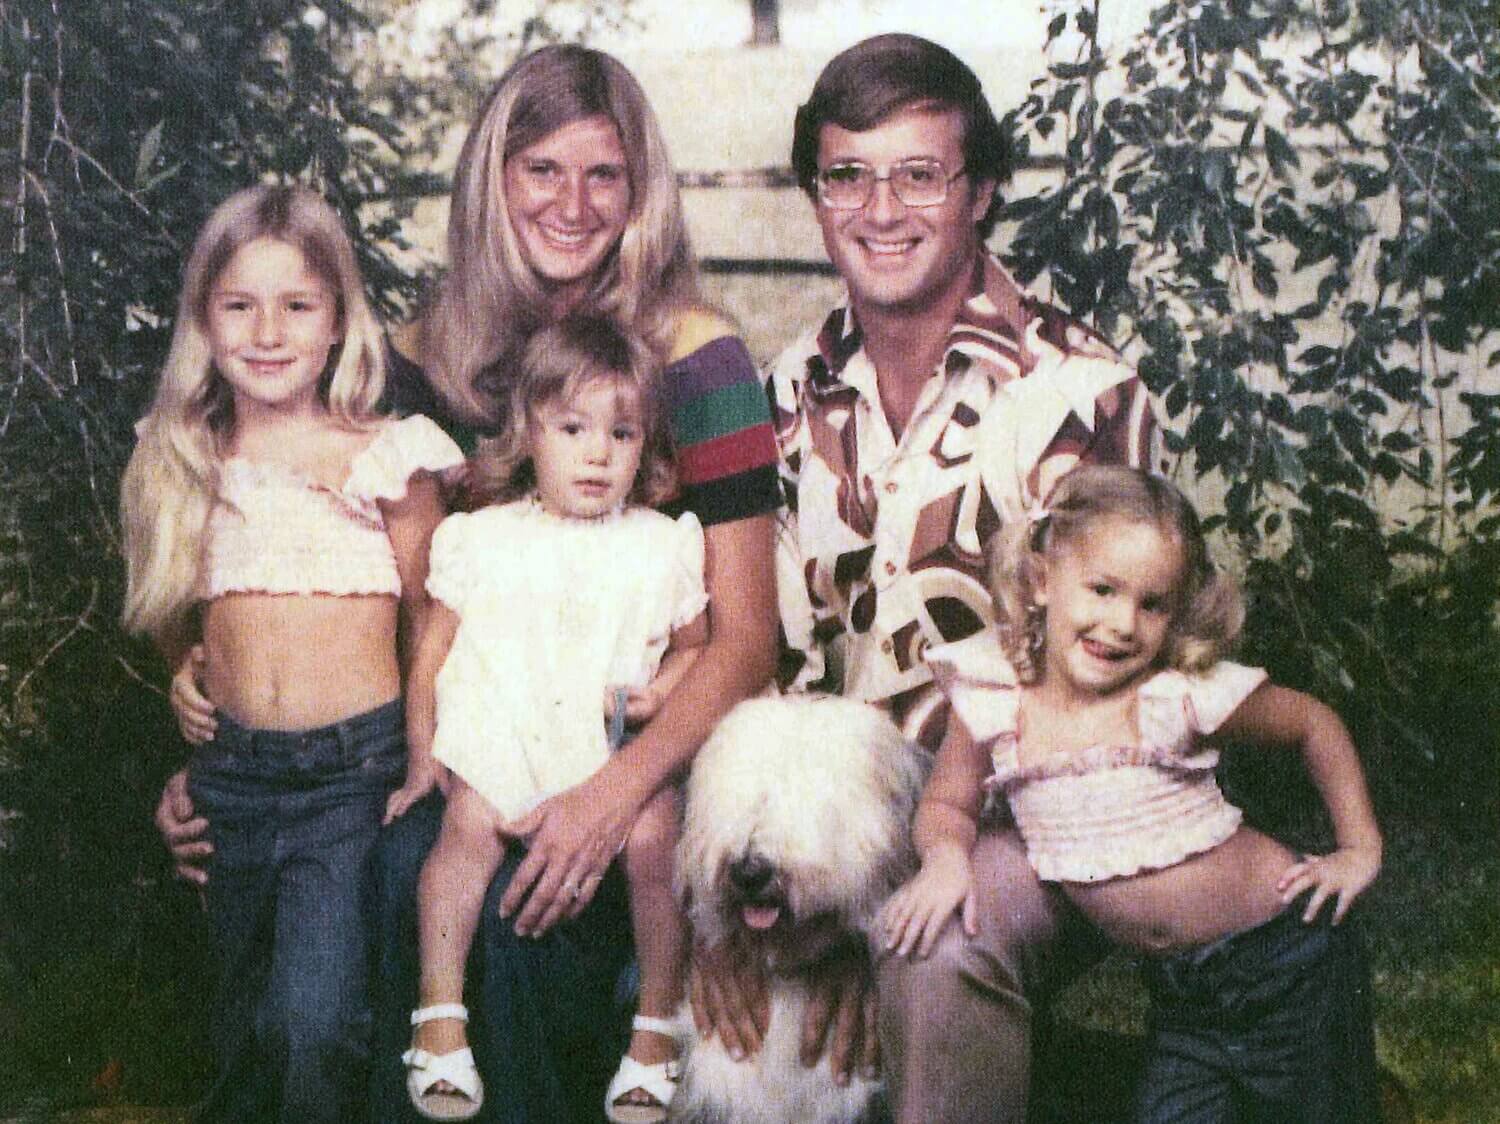 Young Jack Hanna and his family from the 1970s.